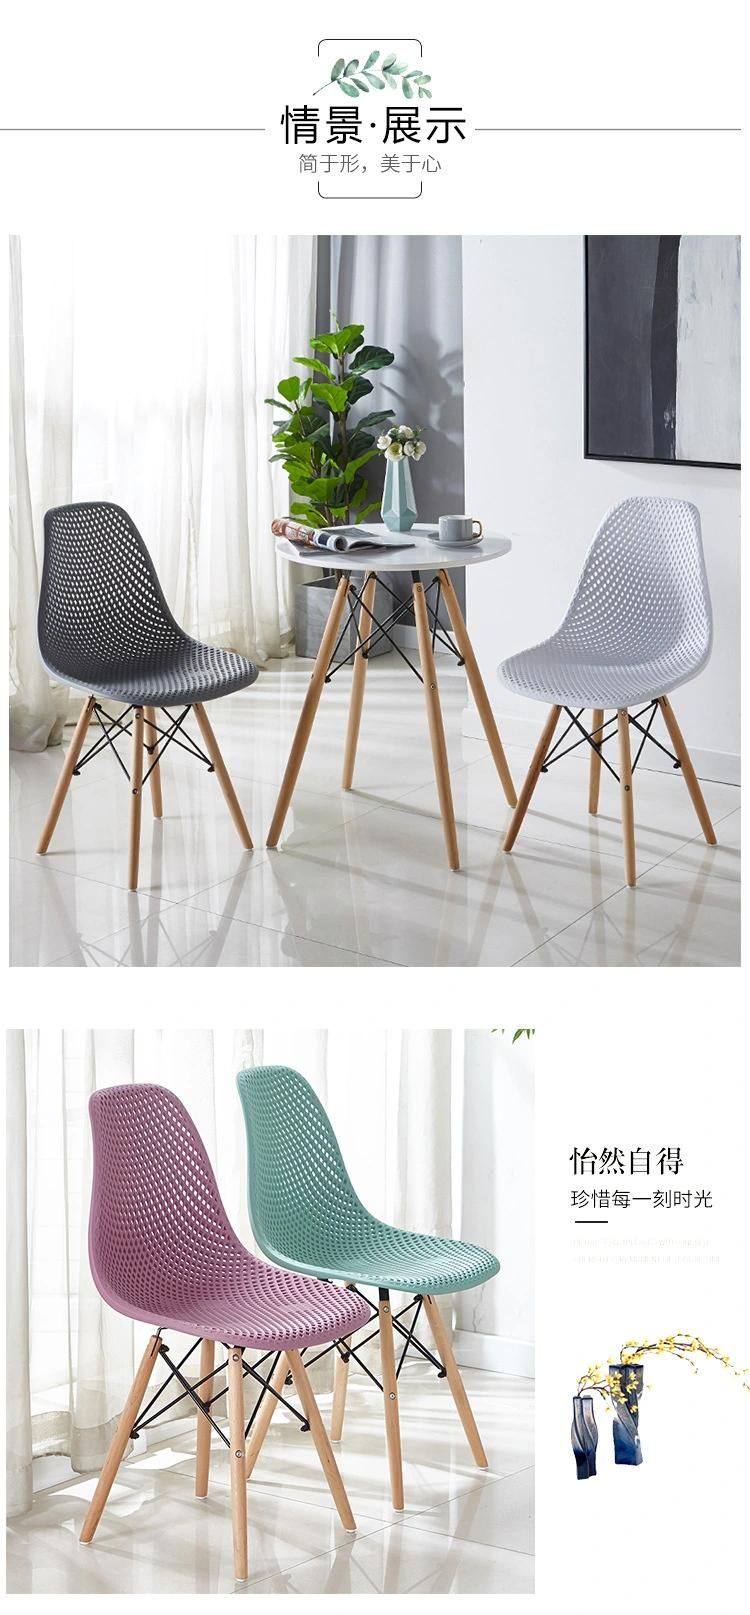 Italian Cafe Chair Sillas De Comedor Home Furniture EMS Chair Solid Wood Leg Plastic Dining Chair